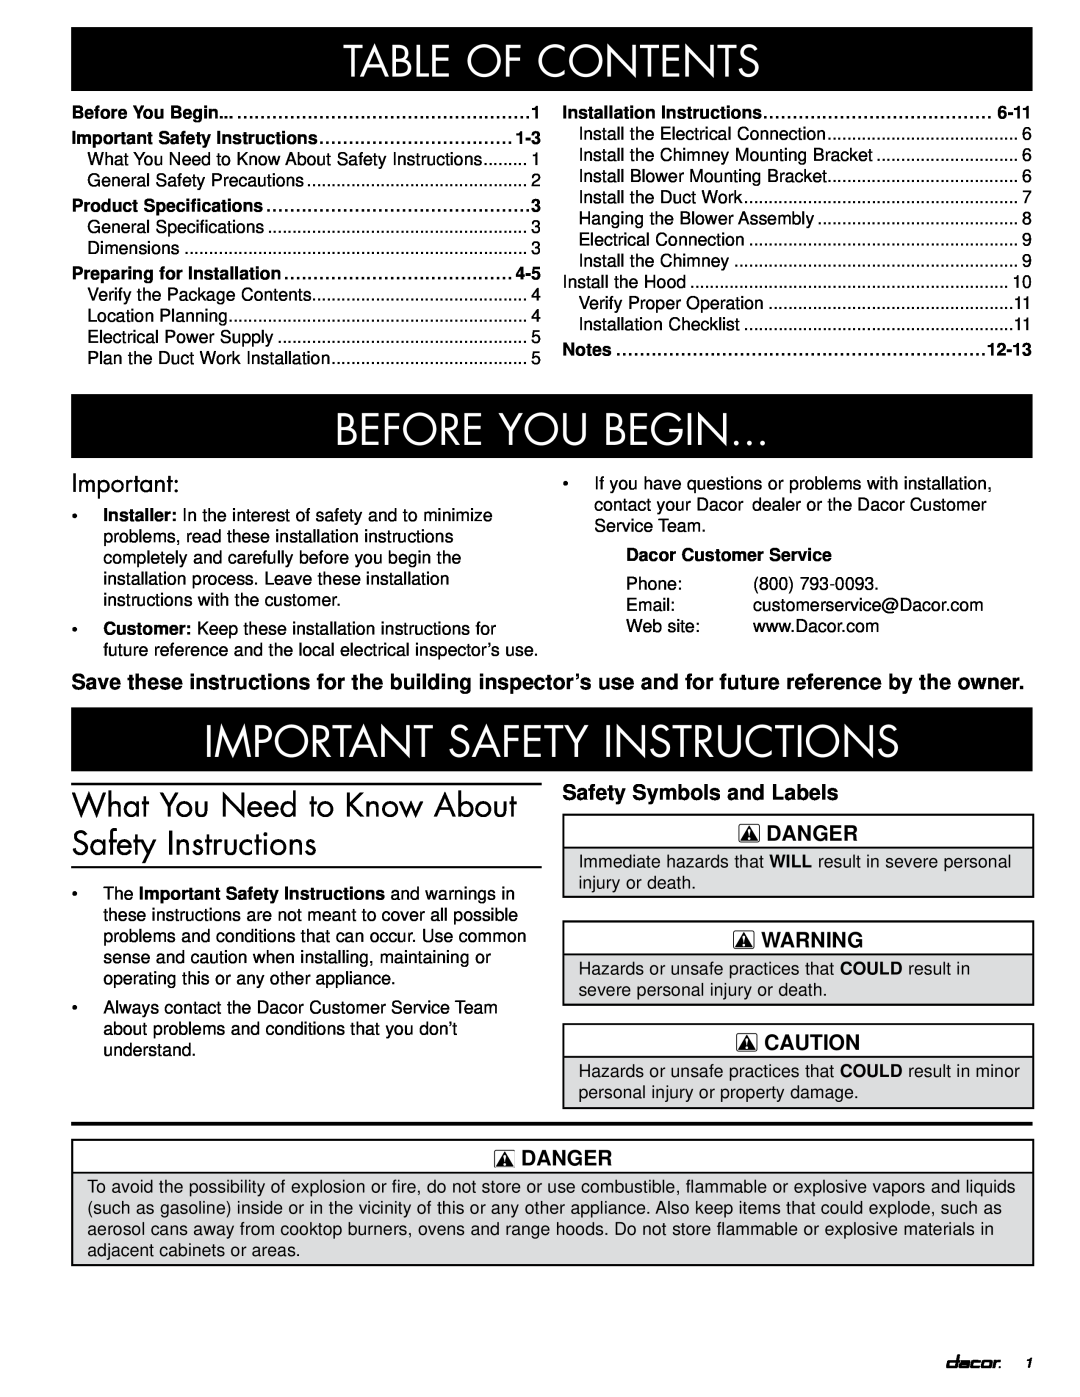 Dacor PHW Table of Contents, Before You Begin, Important Safety Instructions, Product Specifications, Danger, 6-11, 12-13 